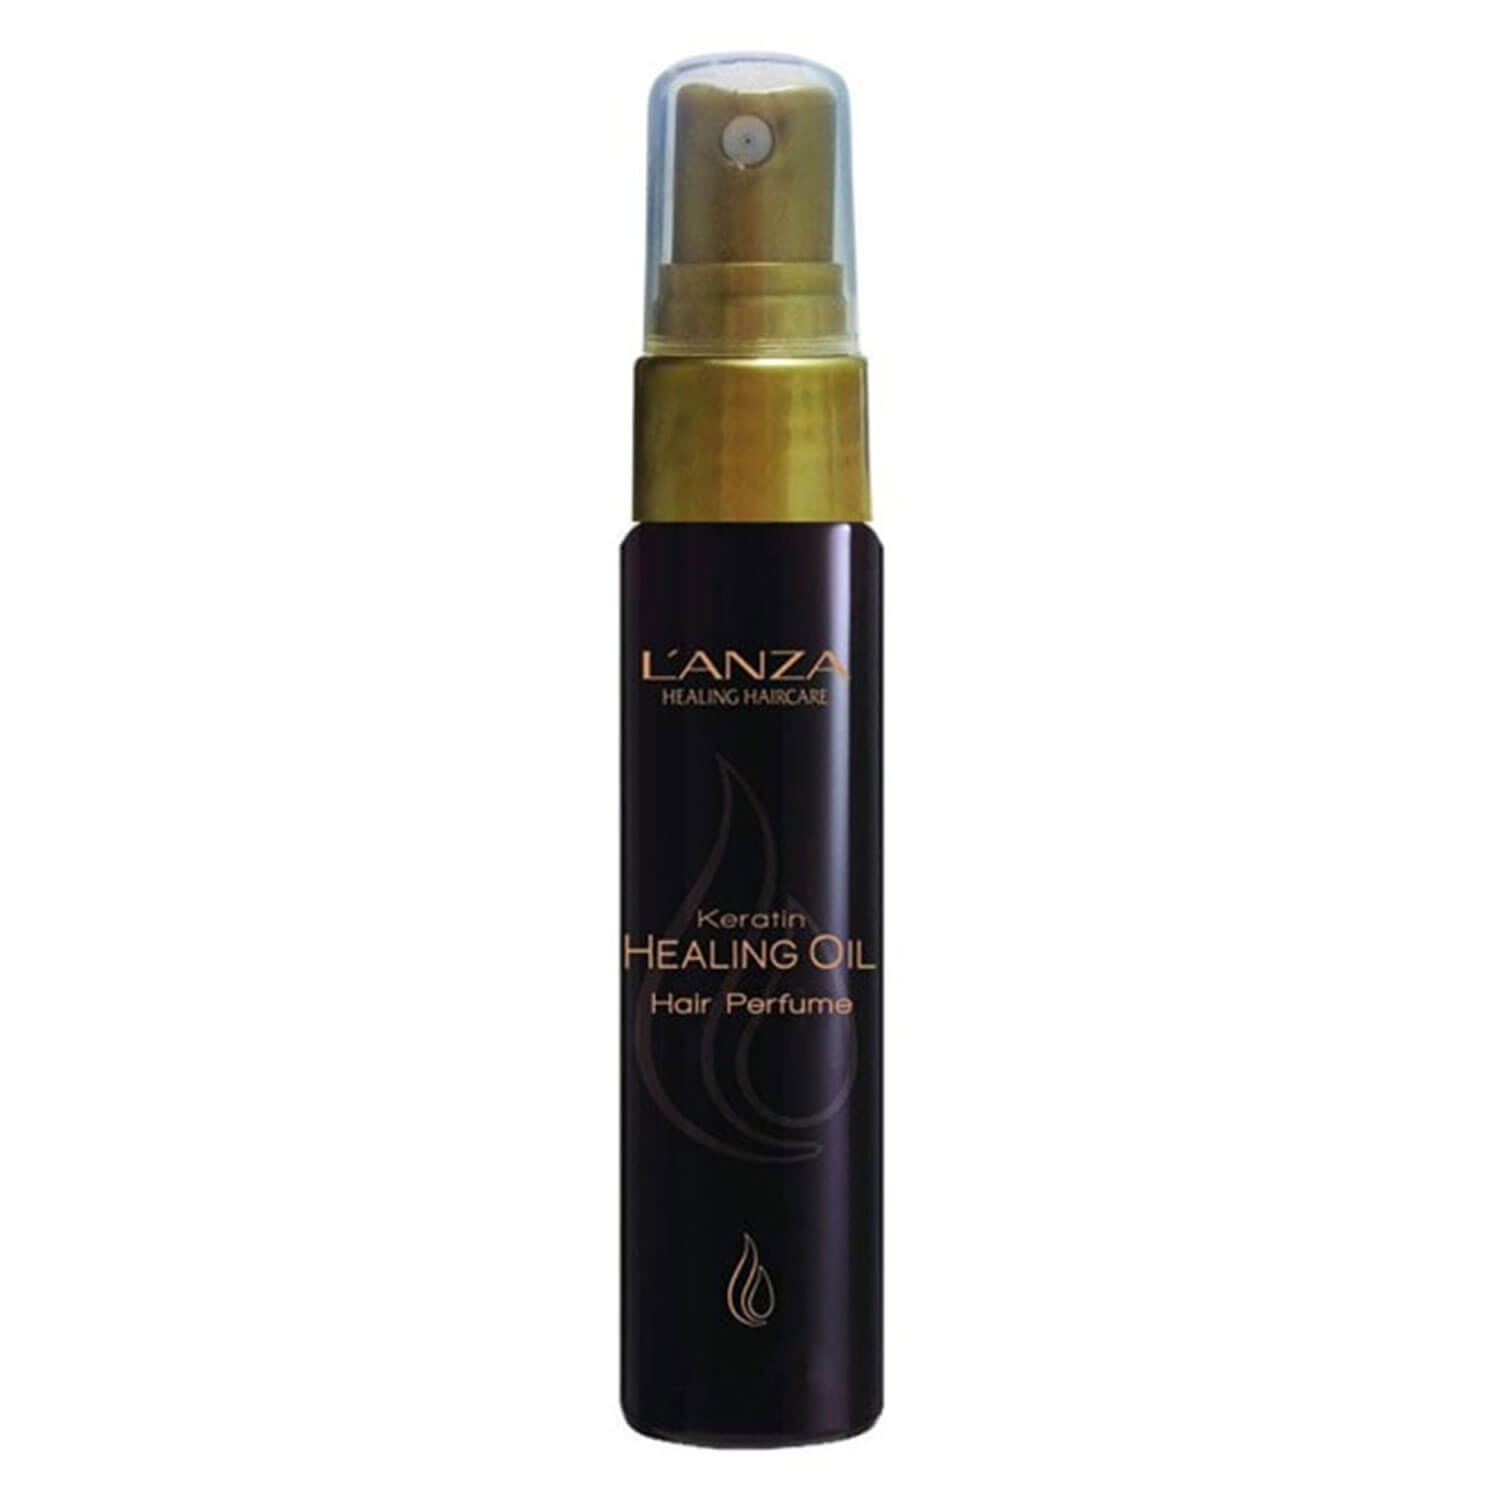 Product image from Keratin Healing Oil - Hair Parfume